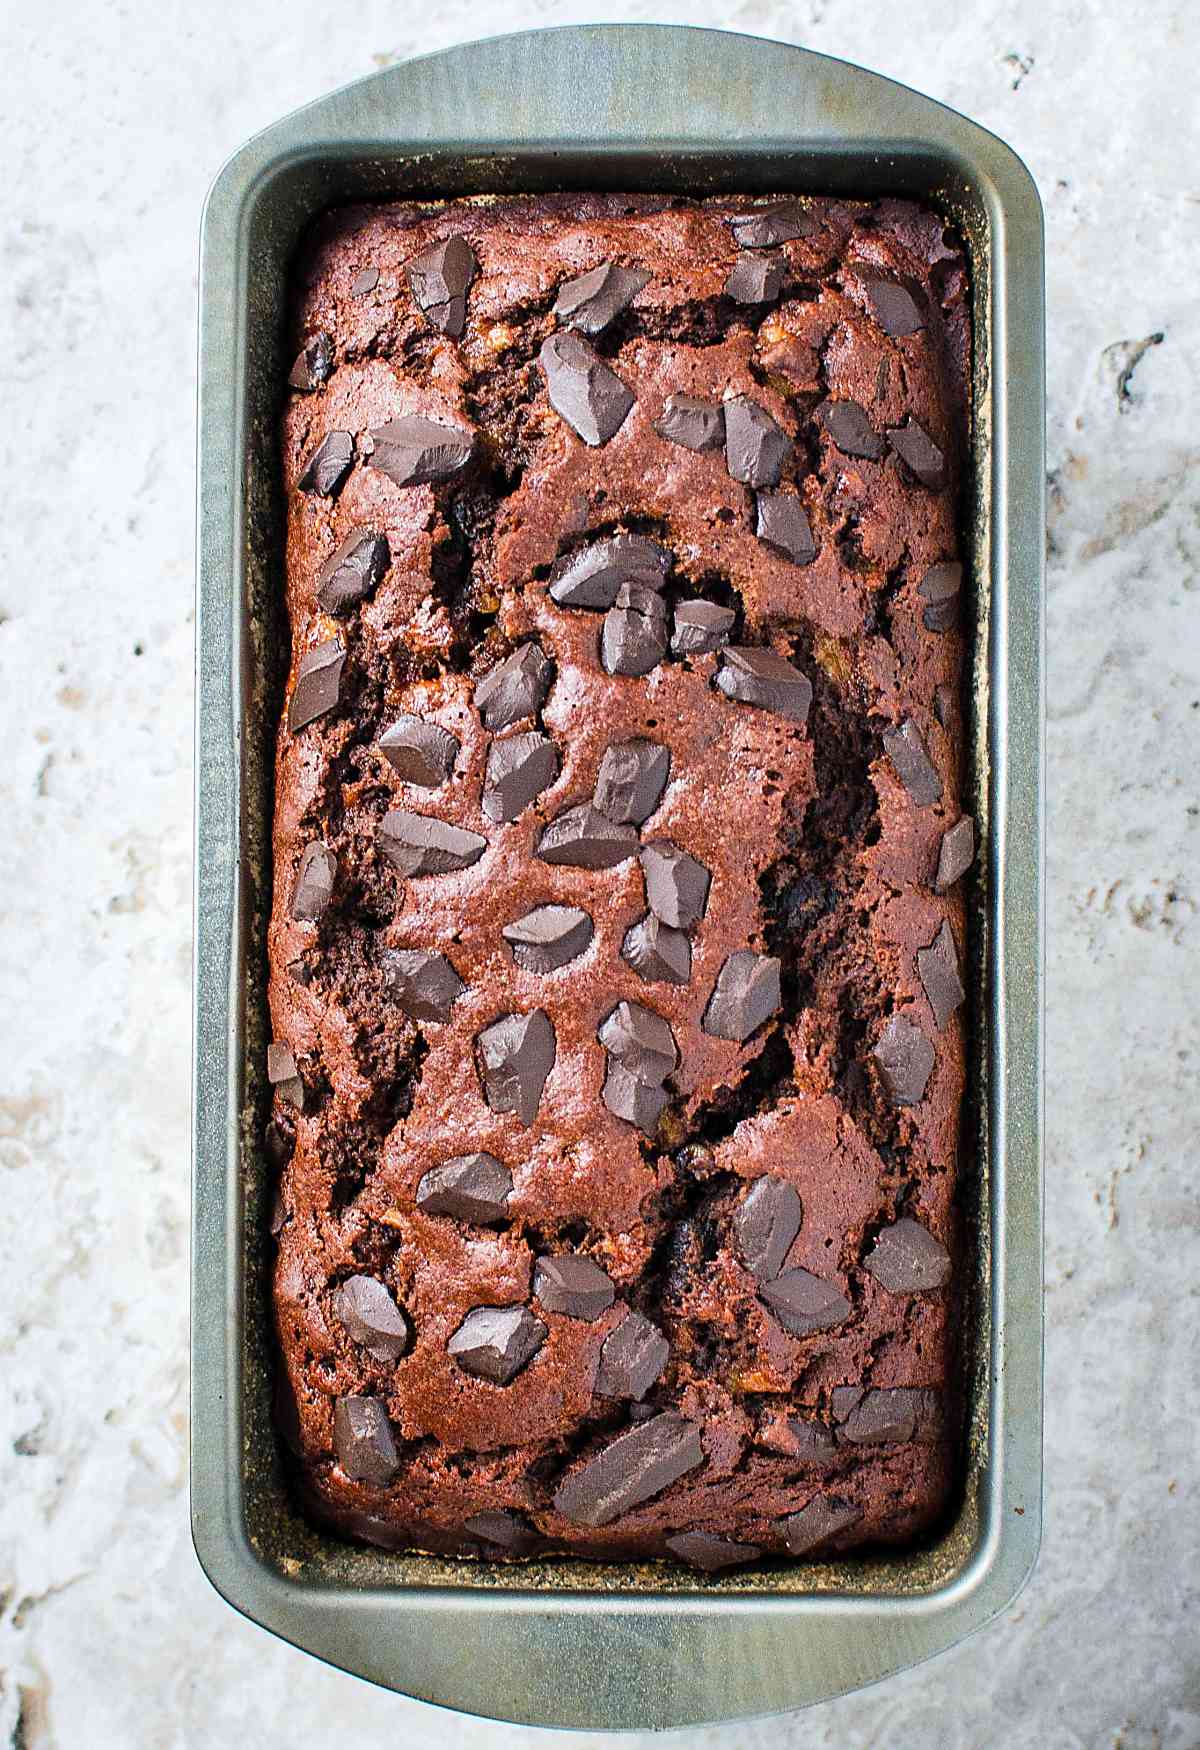 Healthy chocolate oatmeal banana bread in a metal bread loaf pan after baking